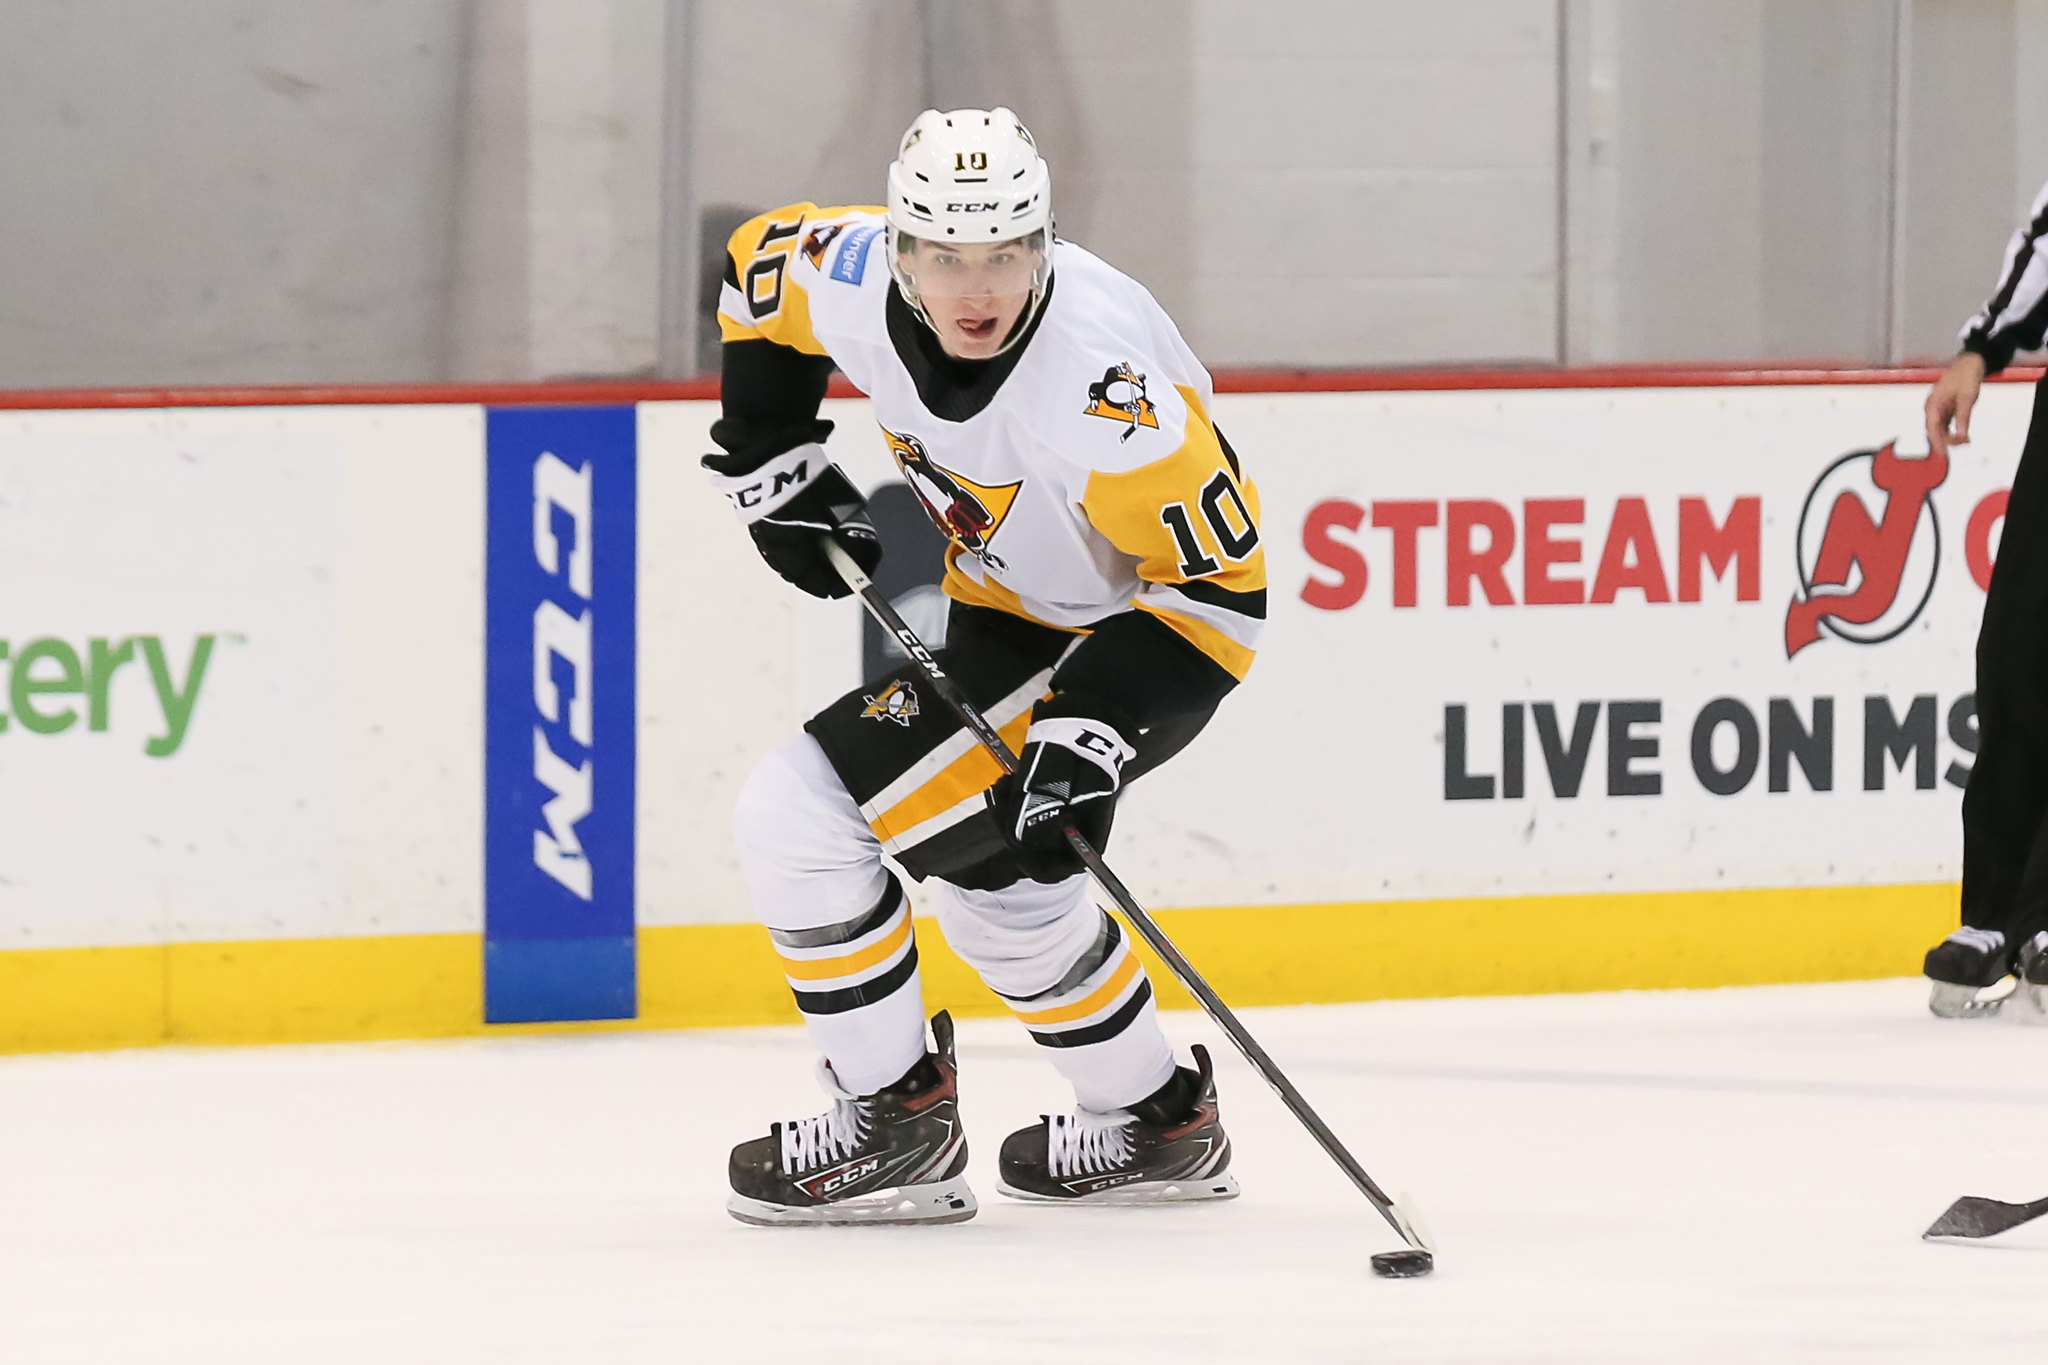 Penguins: Video breakdown of what Drew O'Connor brings to the table